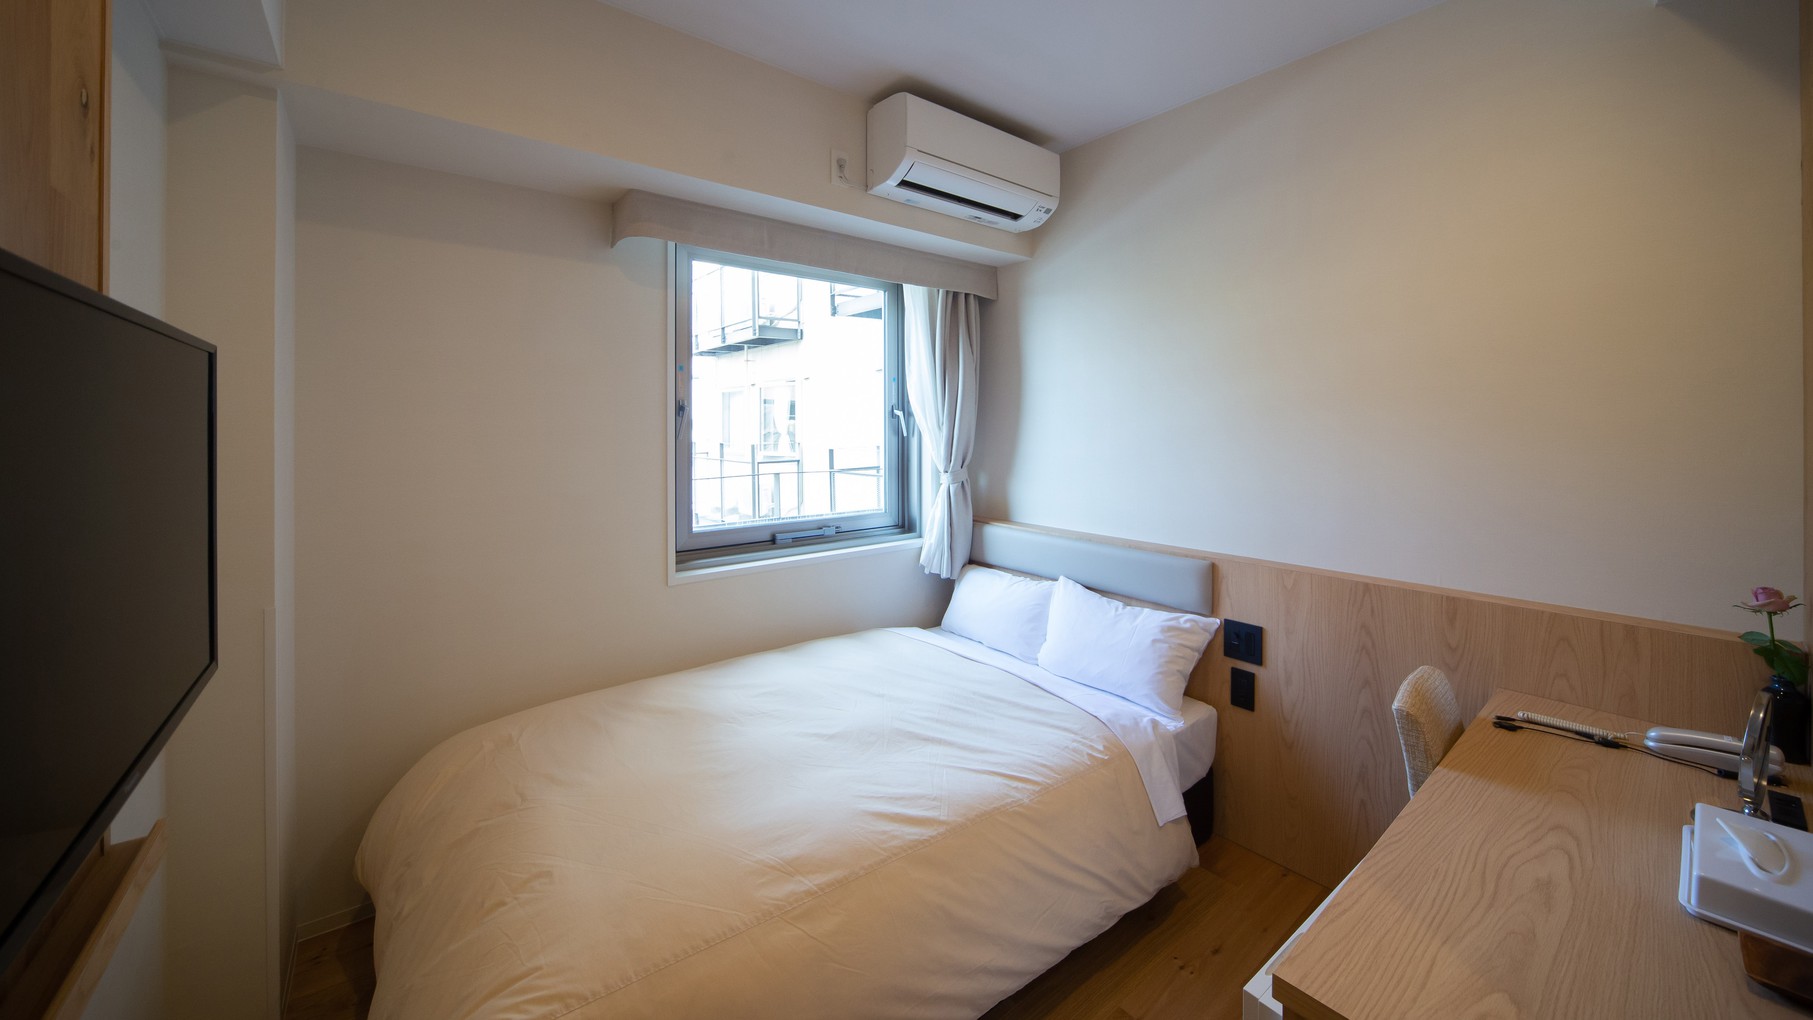 Hotel Gen Kakegawa Hotel Gen Kakegawa is a popular choice amongst travelers in Hamamatsu, whether exploring or just passing through. The property has everything you need for a comfortable stay. To be found at the proper